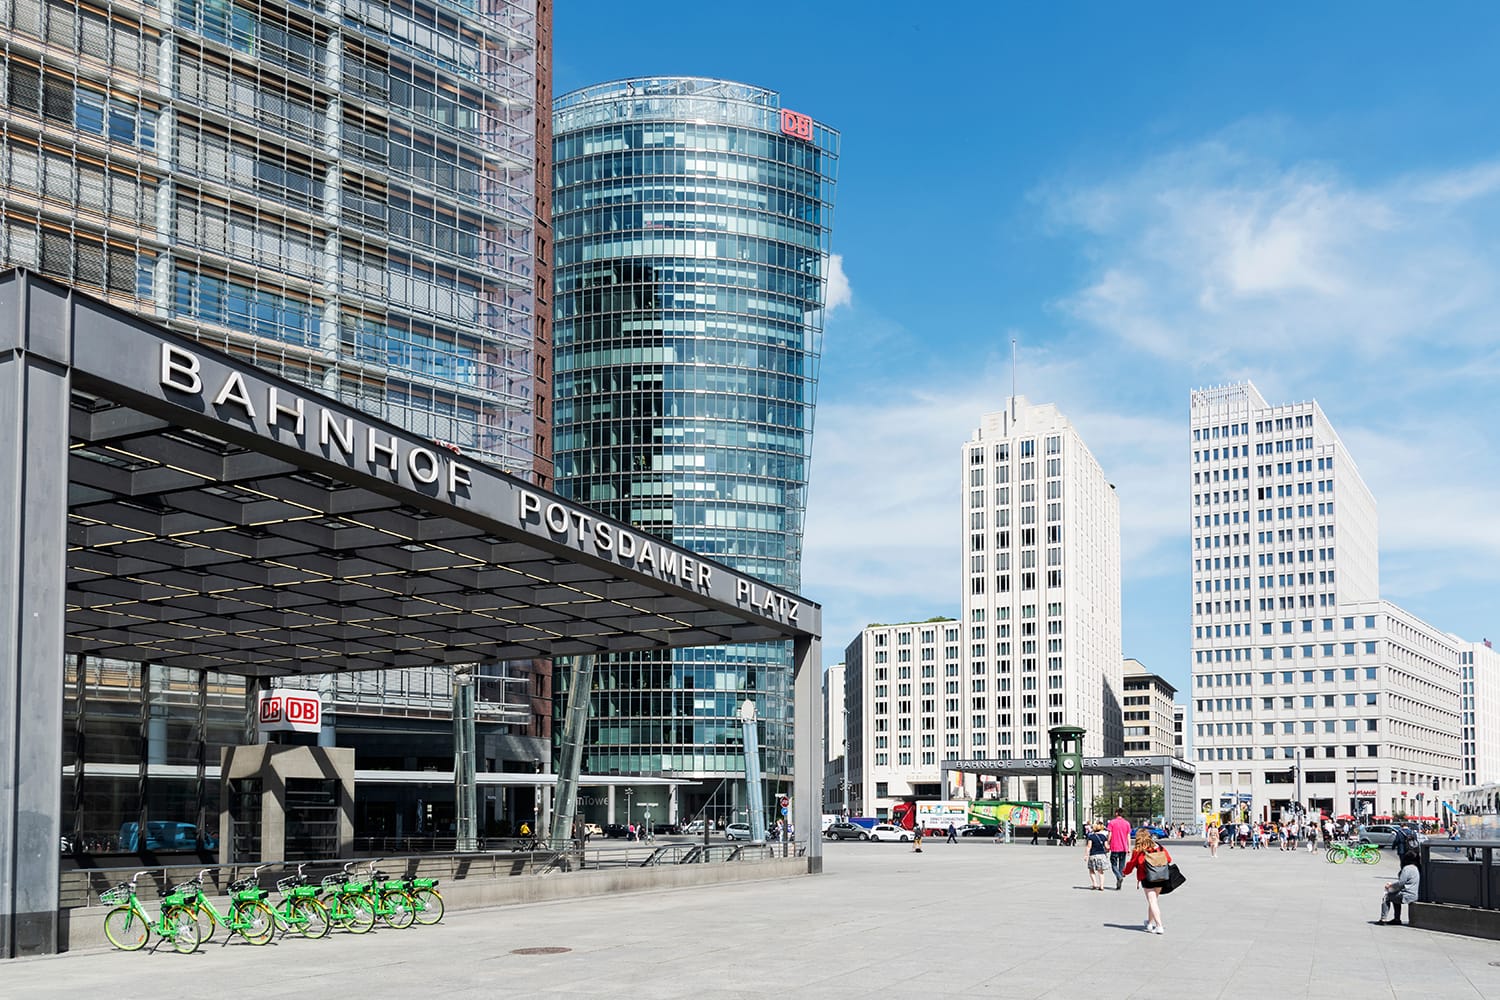 A view of the Potsdamer Platz, an important square in the center of the city, with many new buildings, built in the last years, after the fall of the Berlin Wall